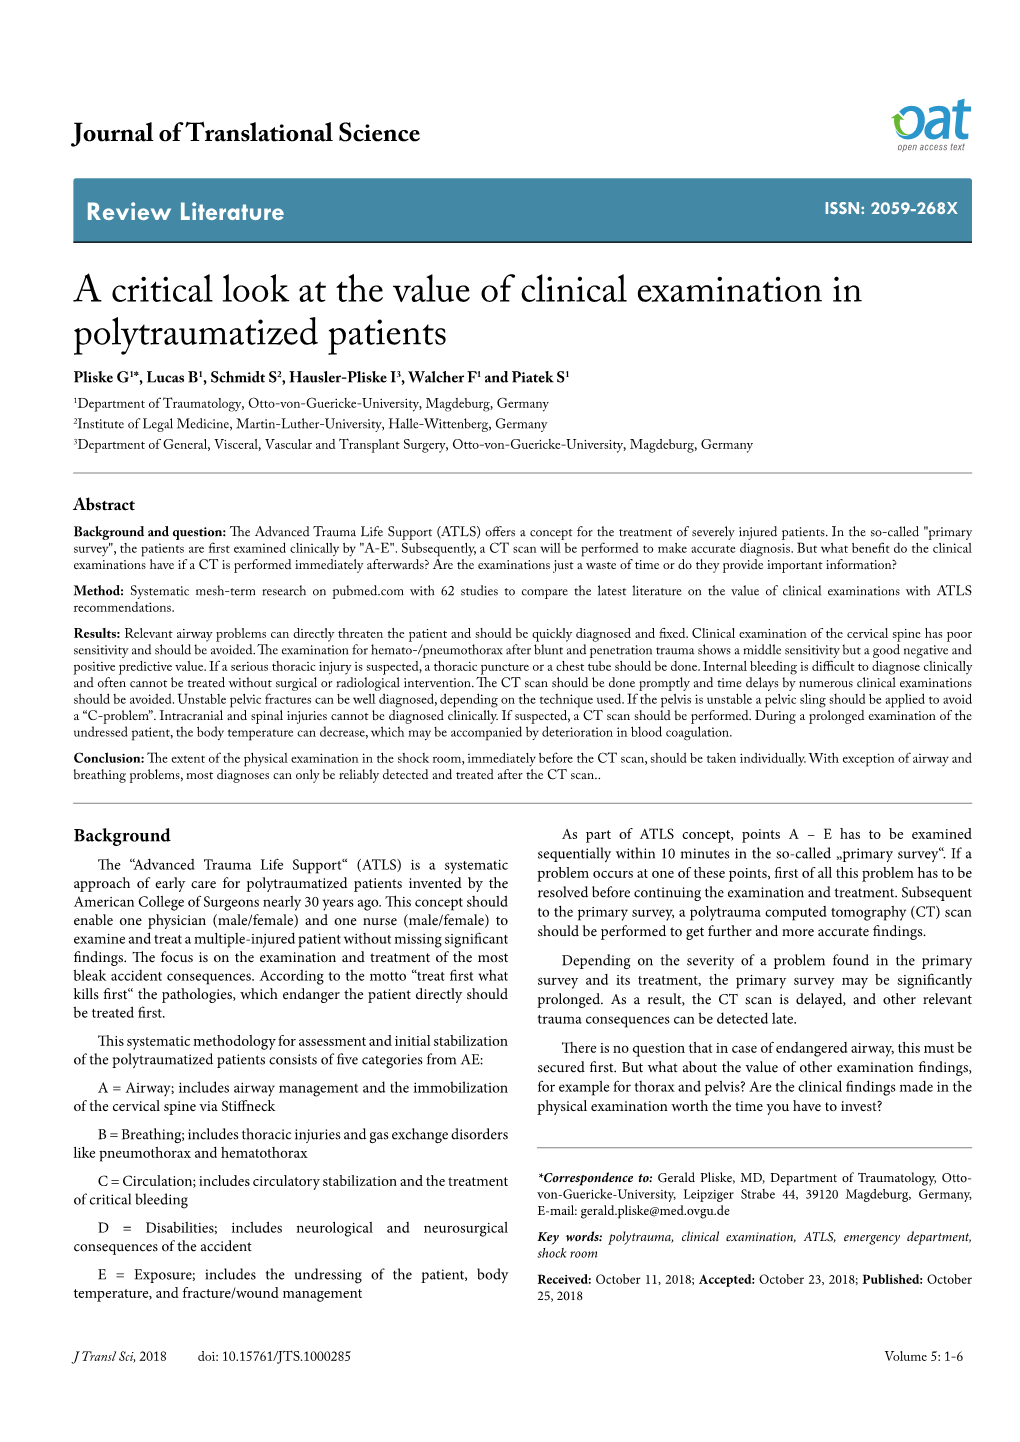 A Critical Look at the Value of Clinical Examination in Polytraumatized